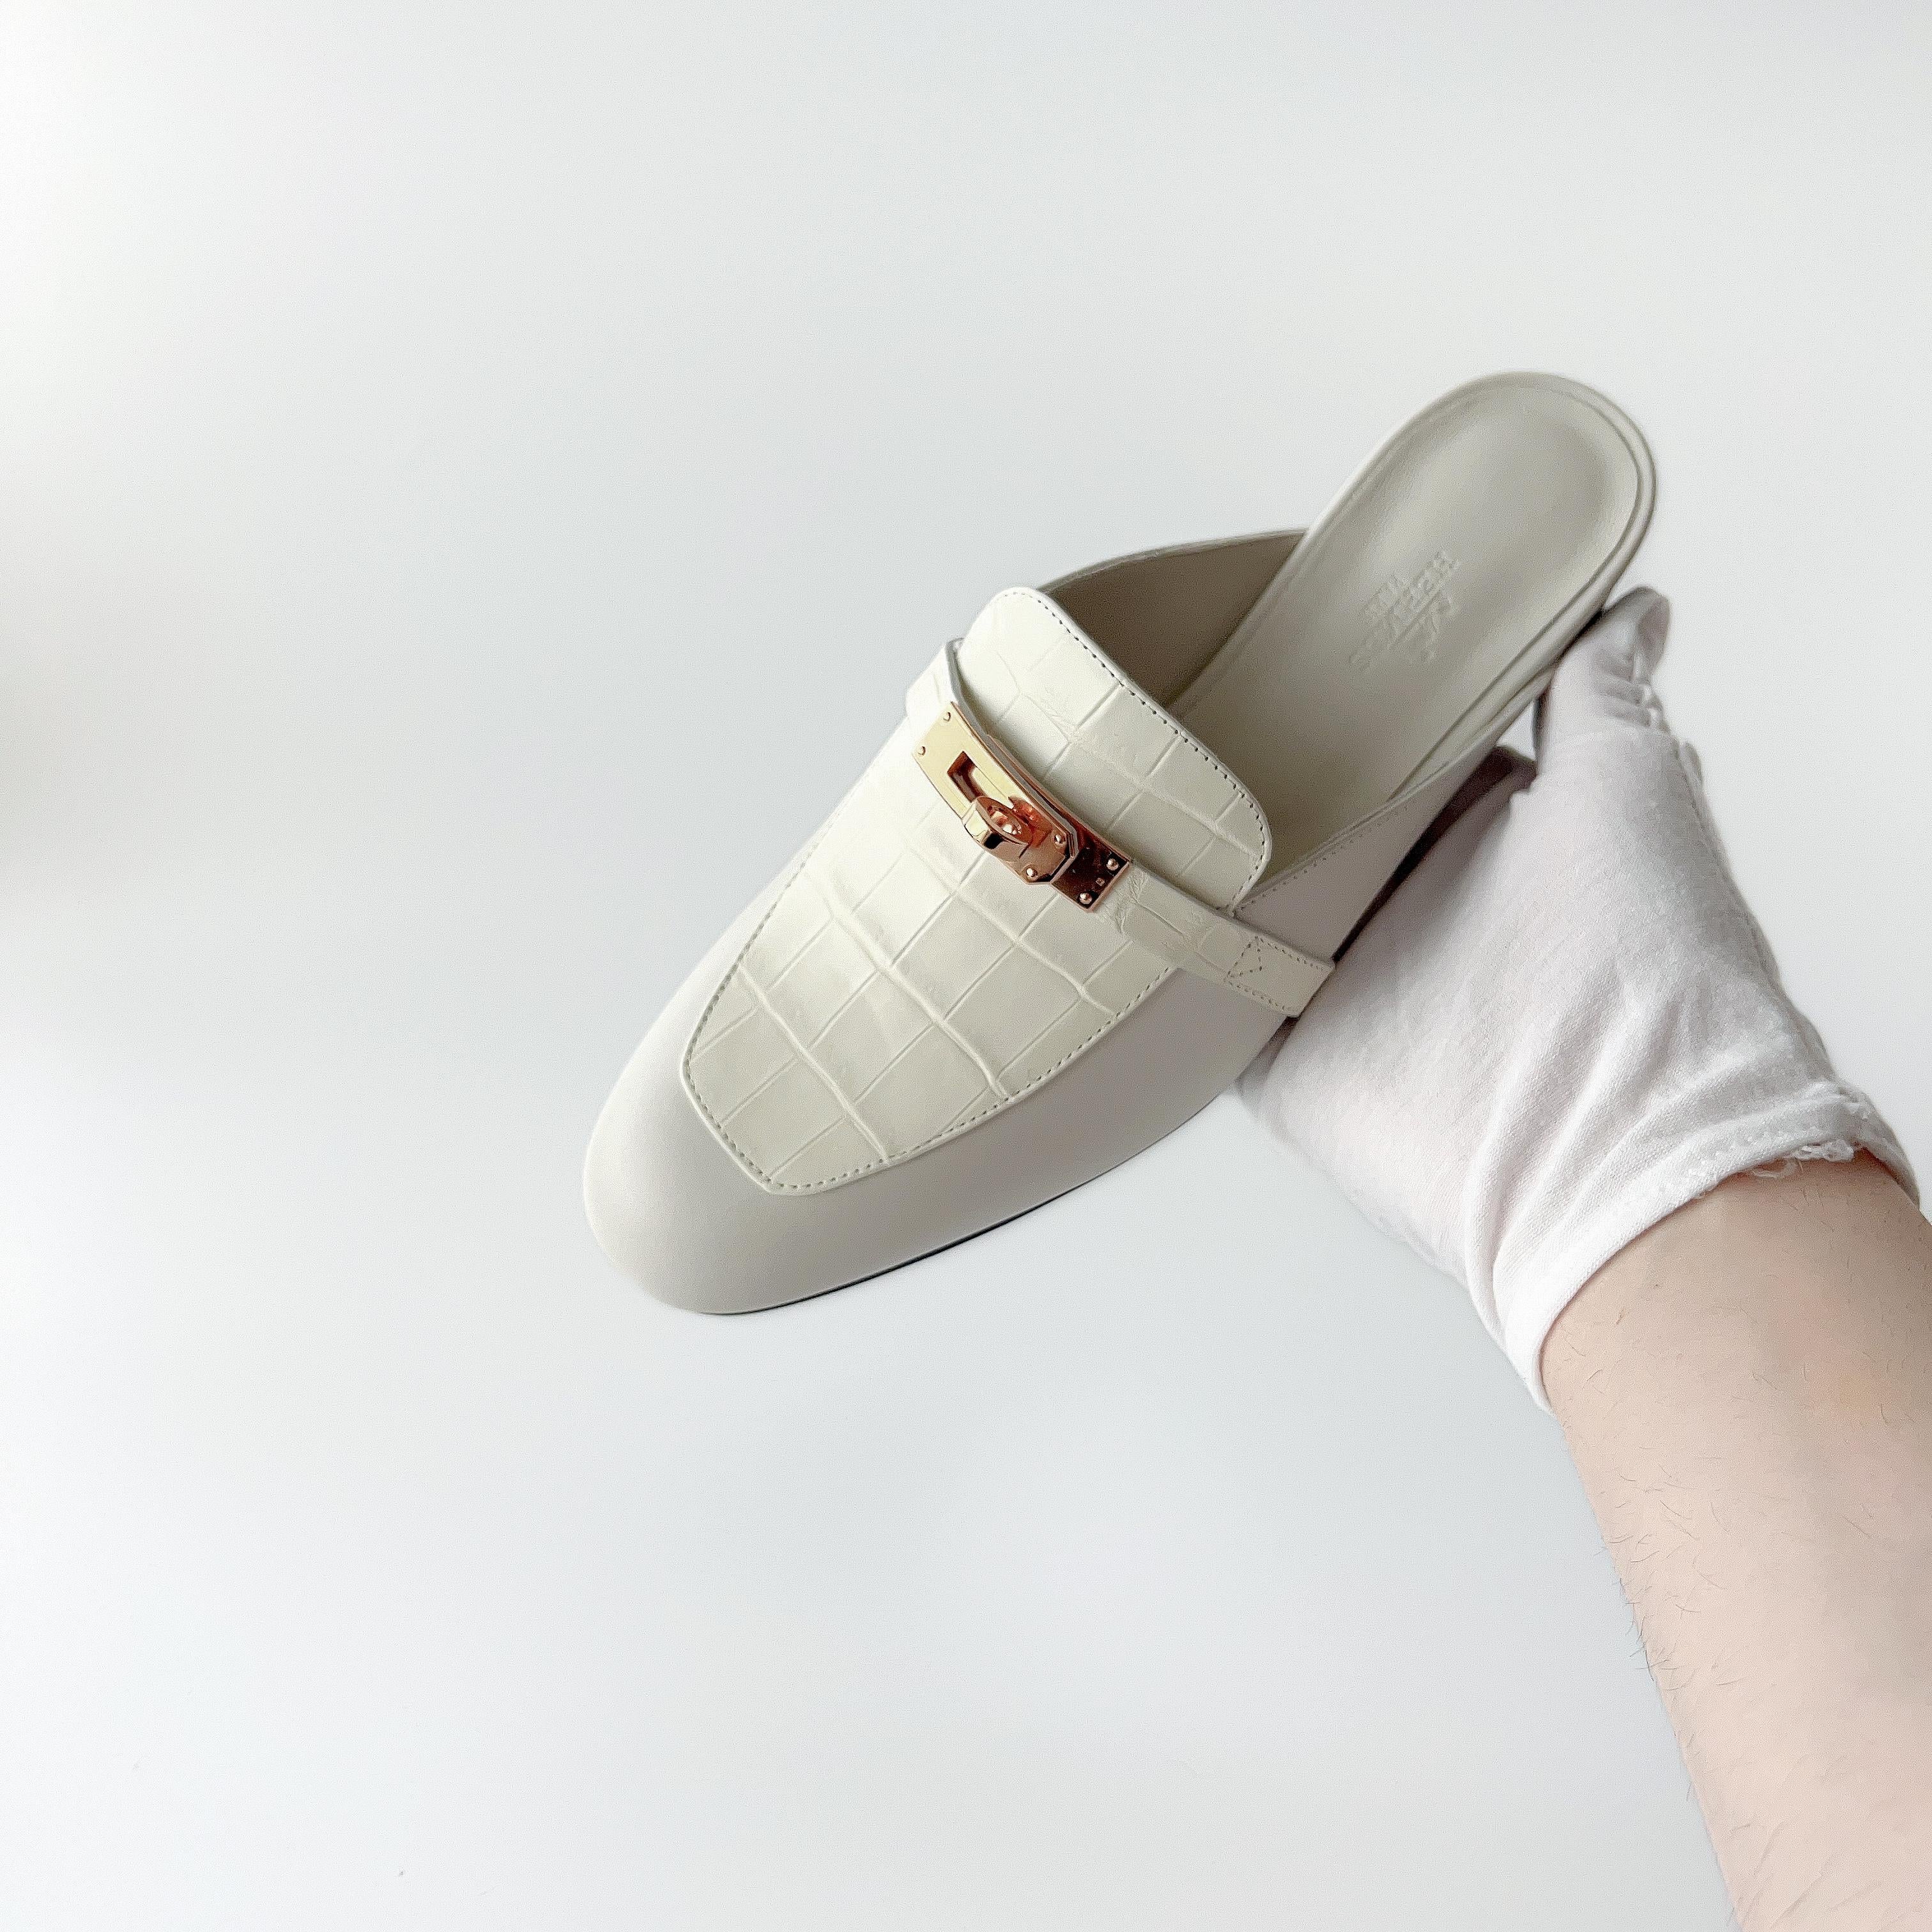 Please Note We Can Only Ship This Item In The UK

---

Shop this very rare pair of Hermes Oz Mule Slippers in Beige Glaise Calfskin and White Croc Touch upper body. To make them even more special the beige glaise croc is complimented with rose gold